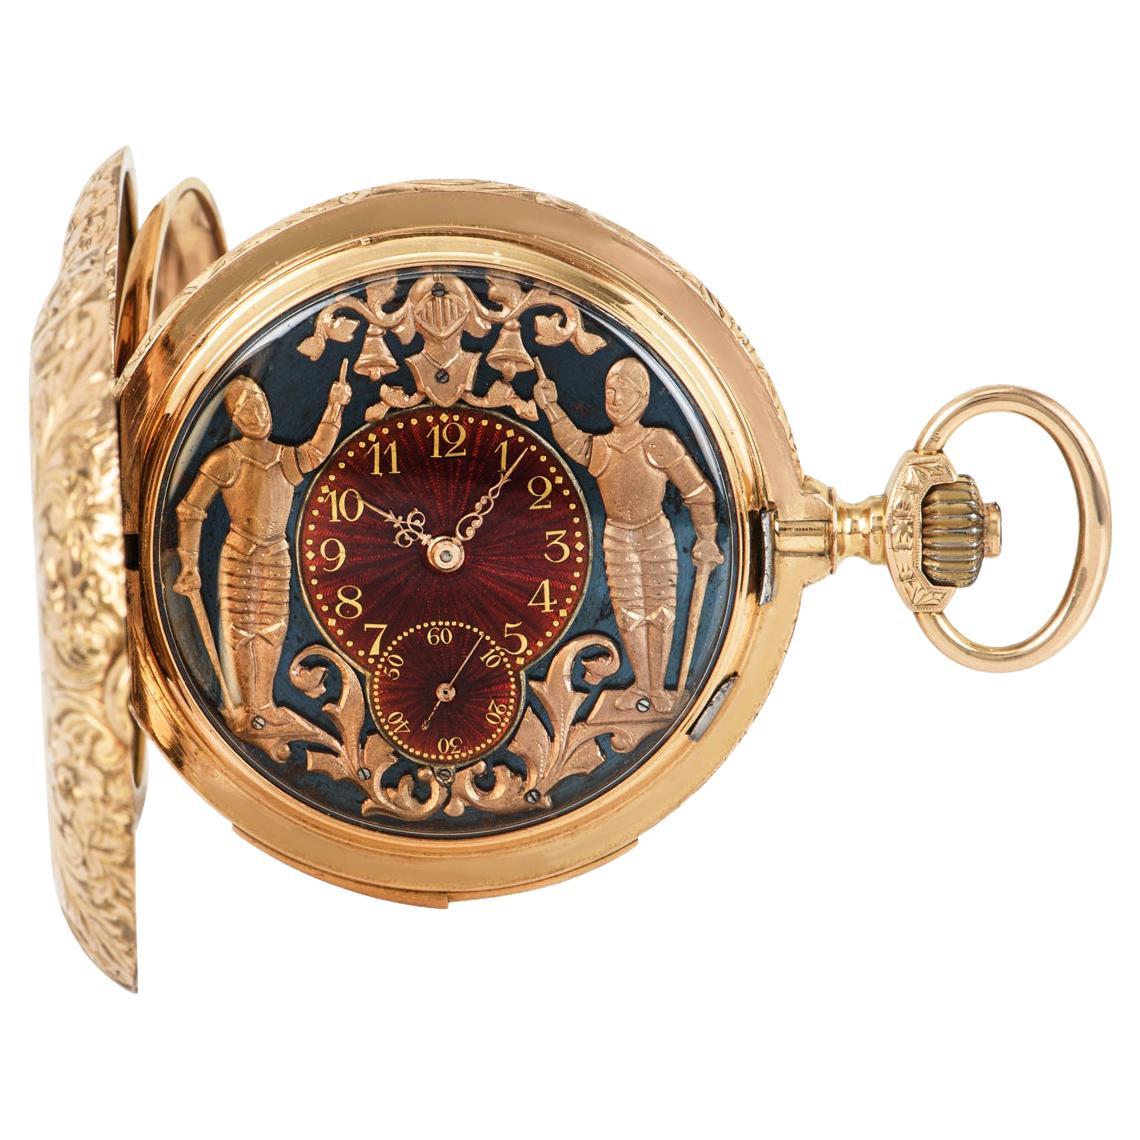 Vulcain 18kt Rose Gold Full Hunter Minute Repeating Automaton Pocket Watch C1880 For Sale